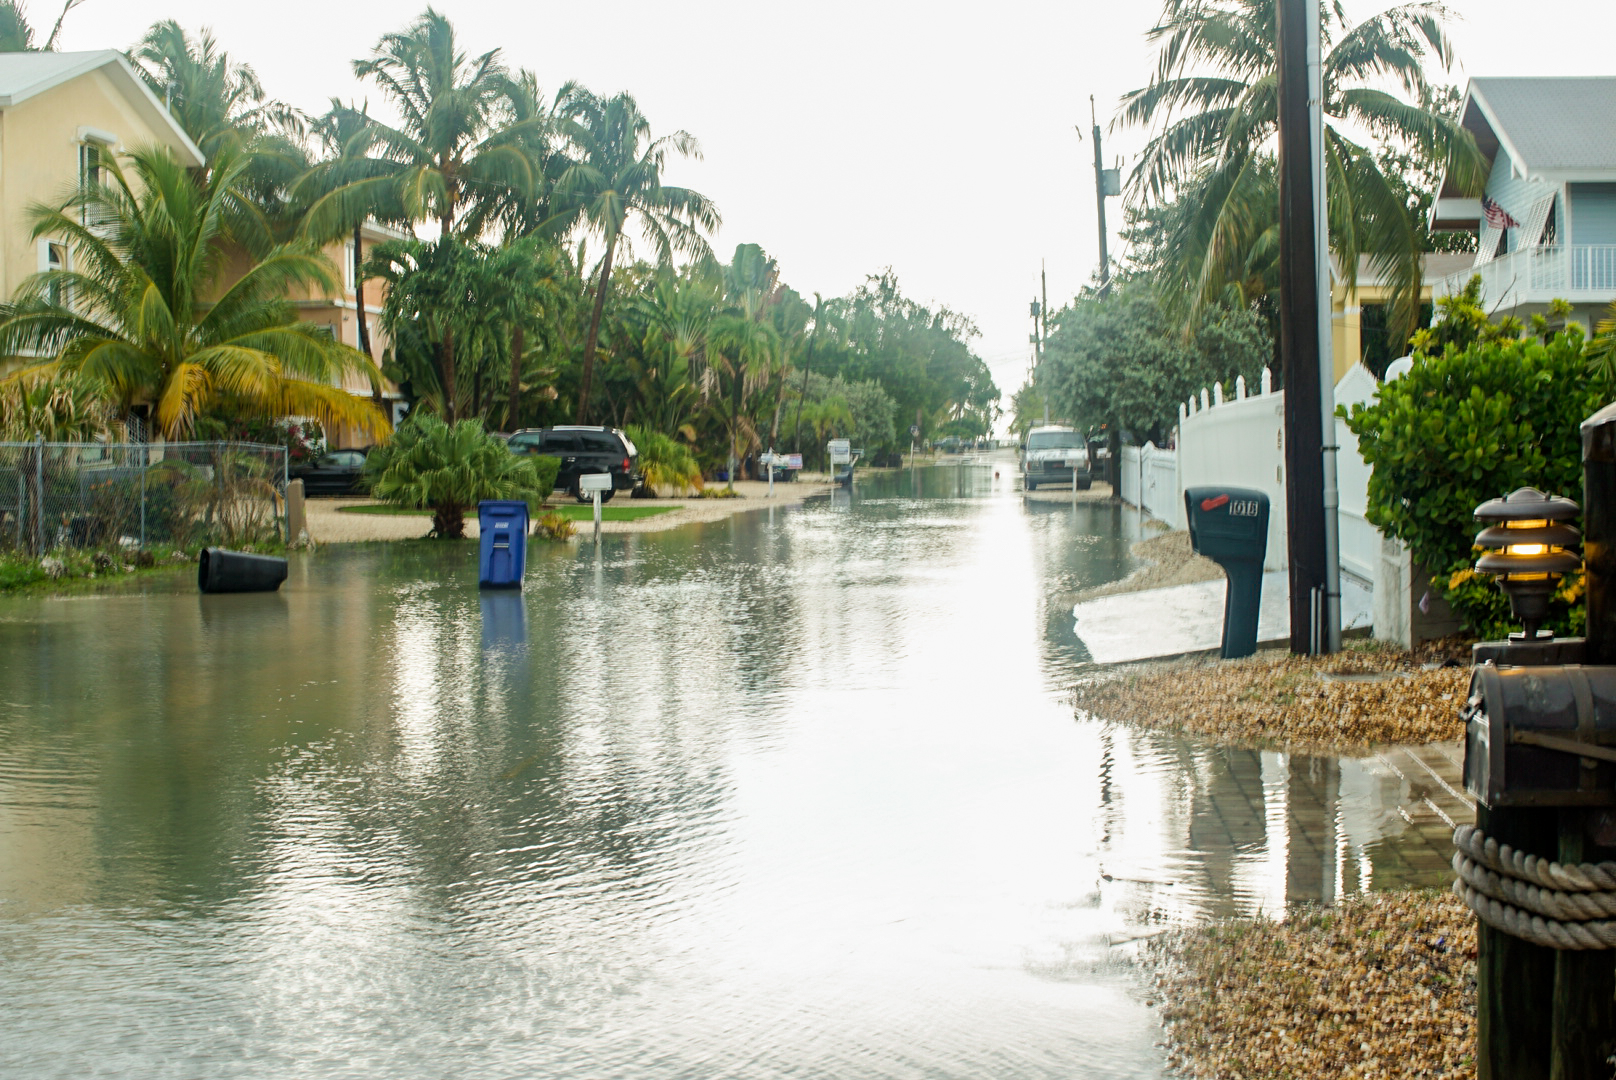 King Tides Causing Nuisance Flooding in Low-Lying Areas of Monroe County